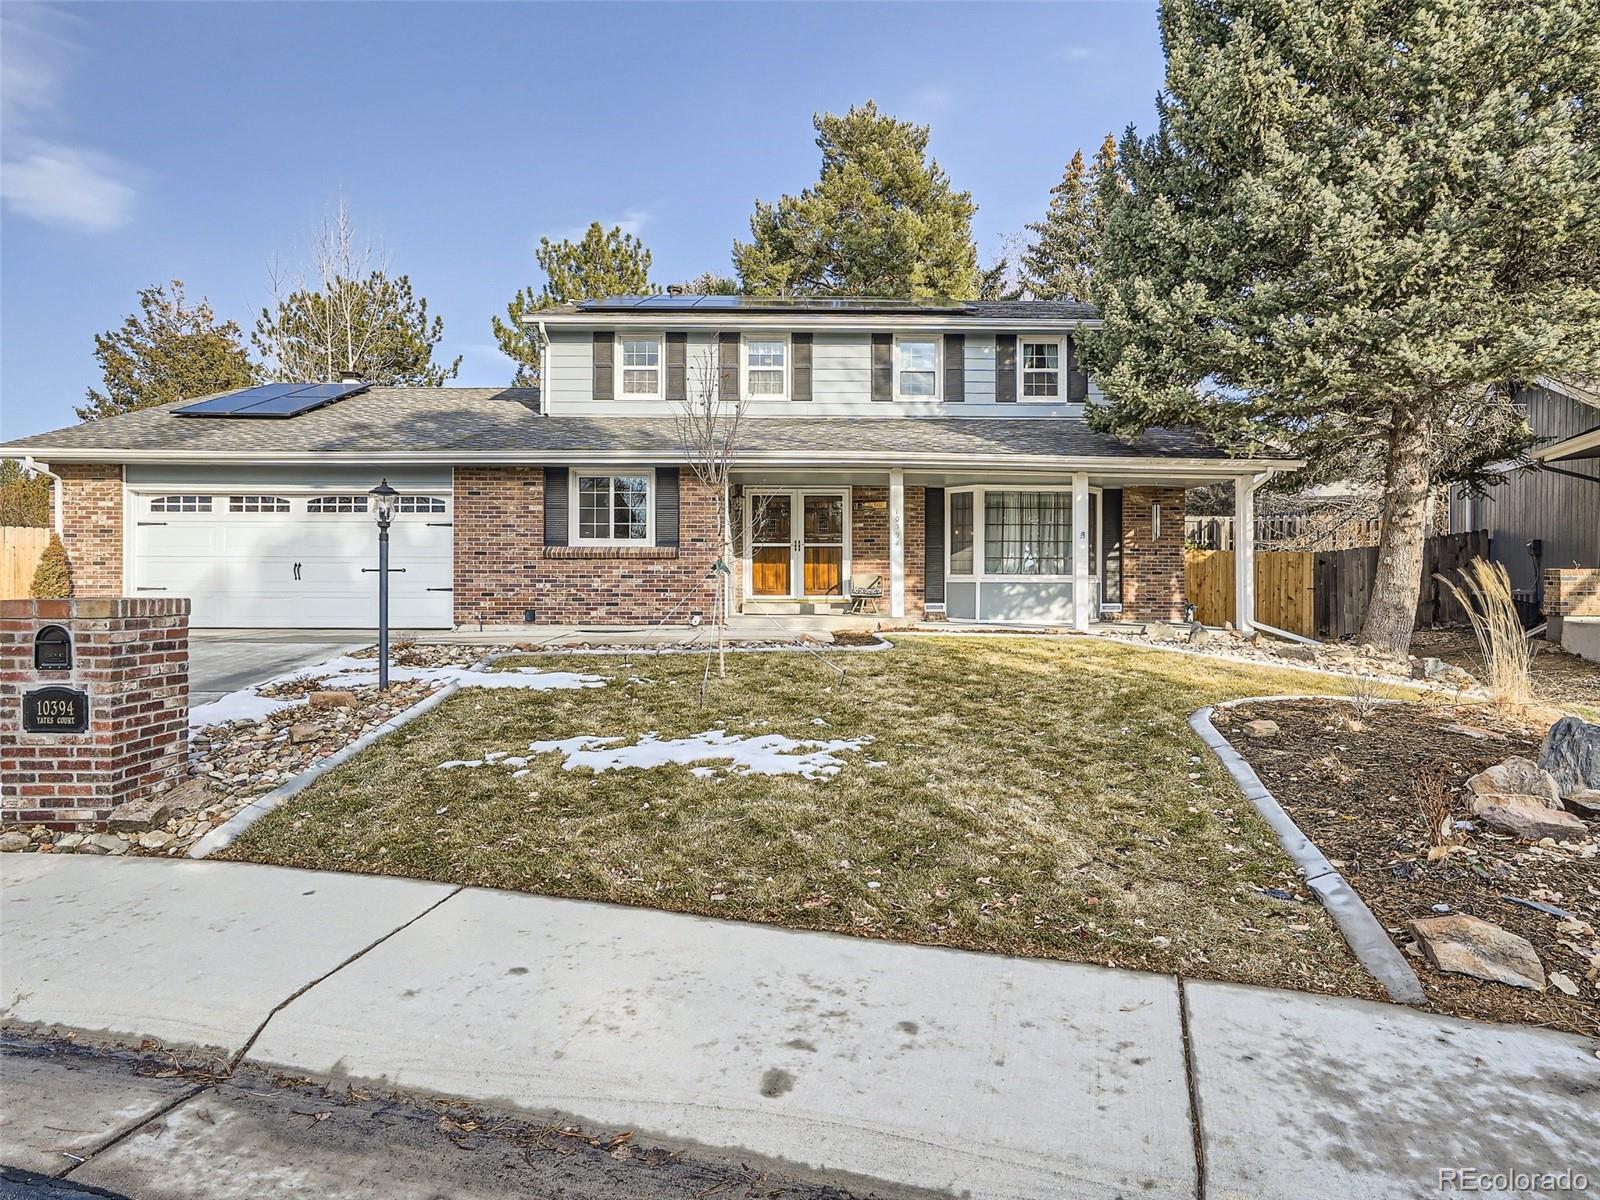 Report Image for 10394  Yates Court,Westminster, Colorado